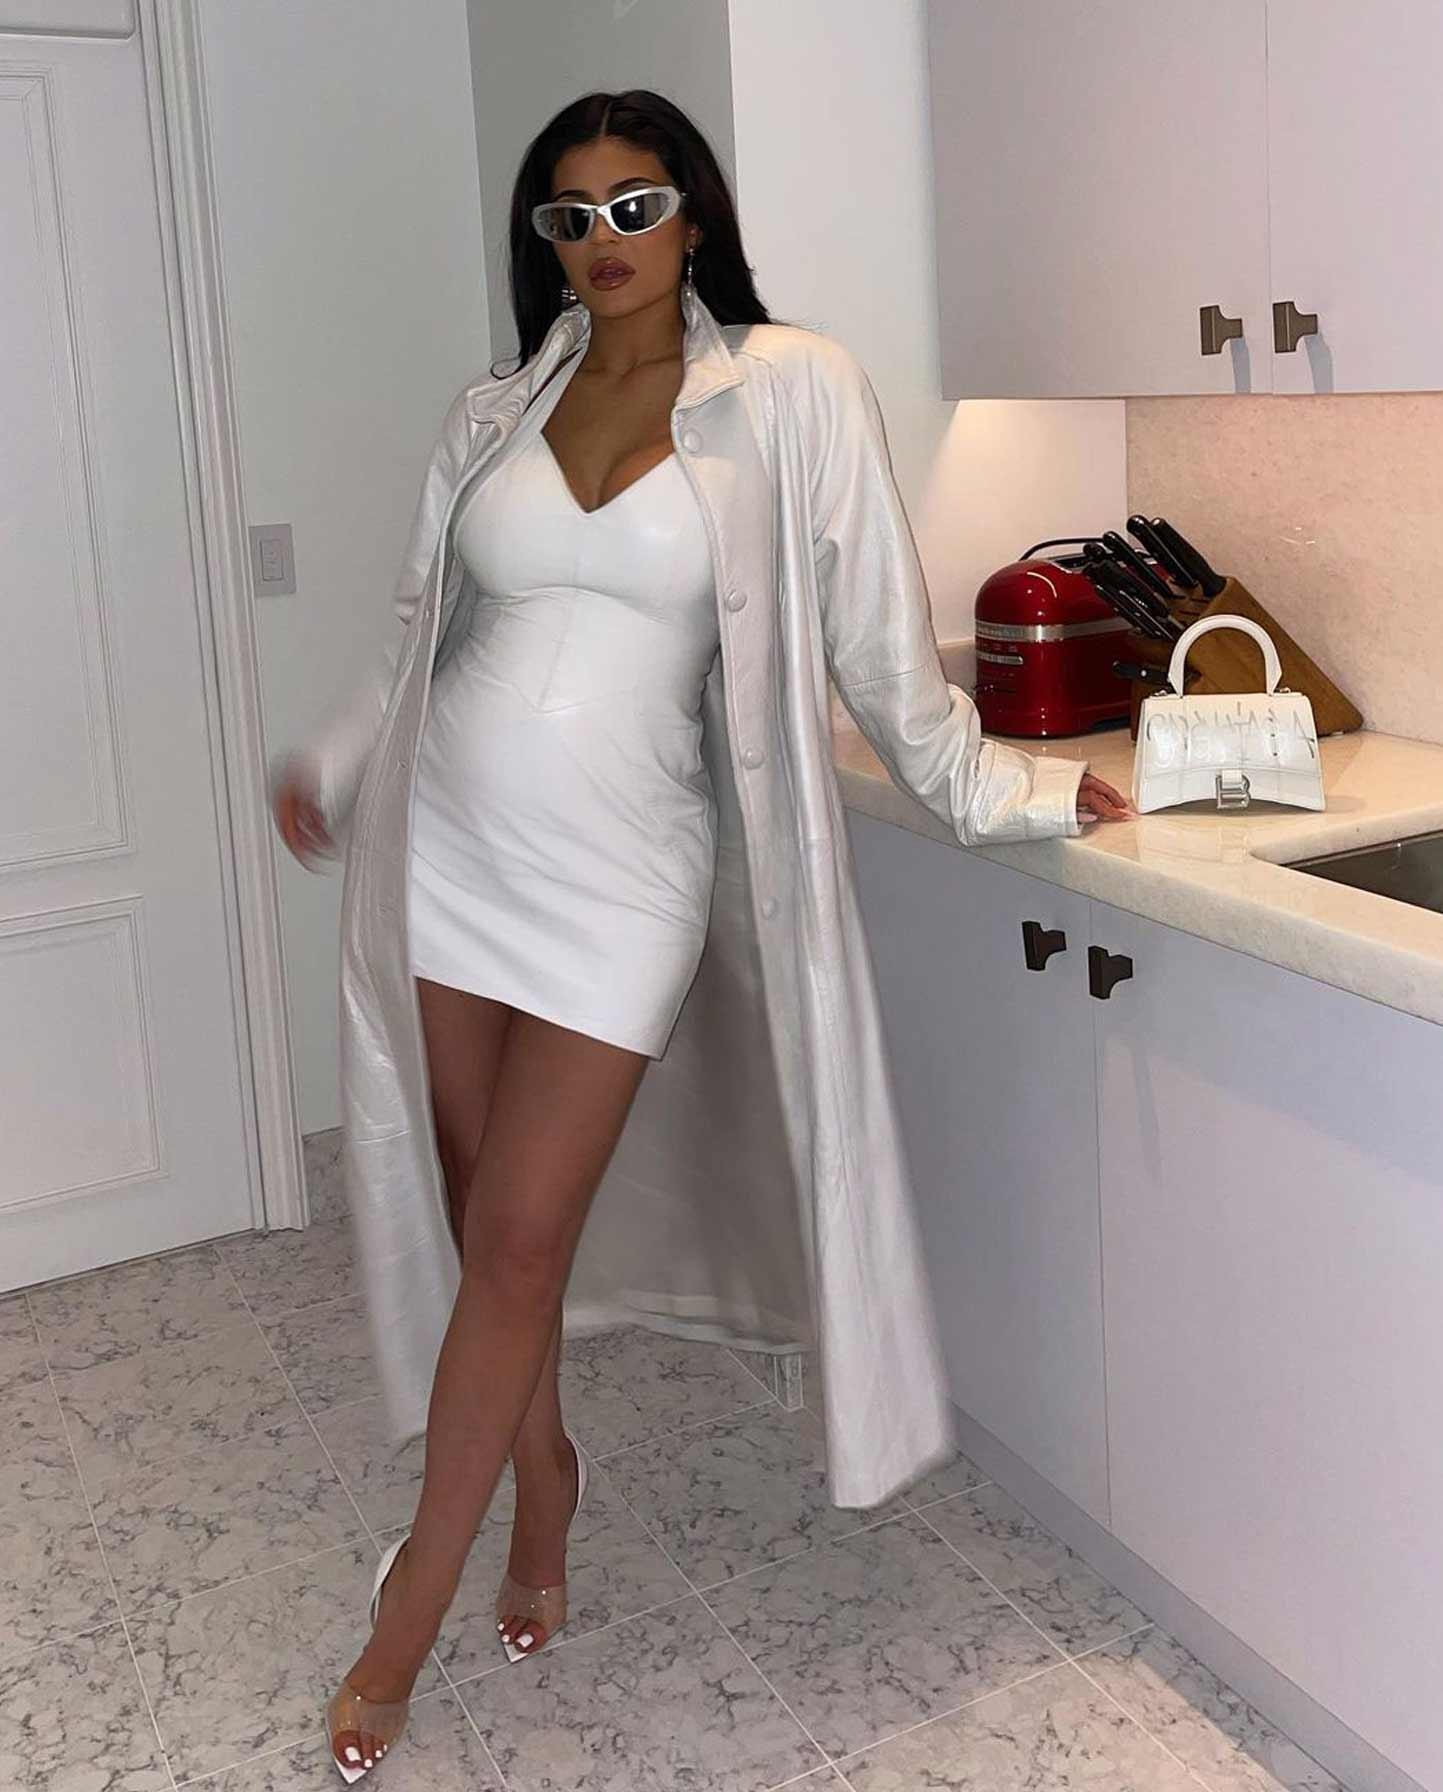 Kylie Jenner in a white latex outfit with her baby bump showing.